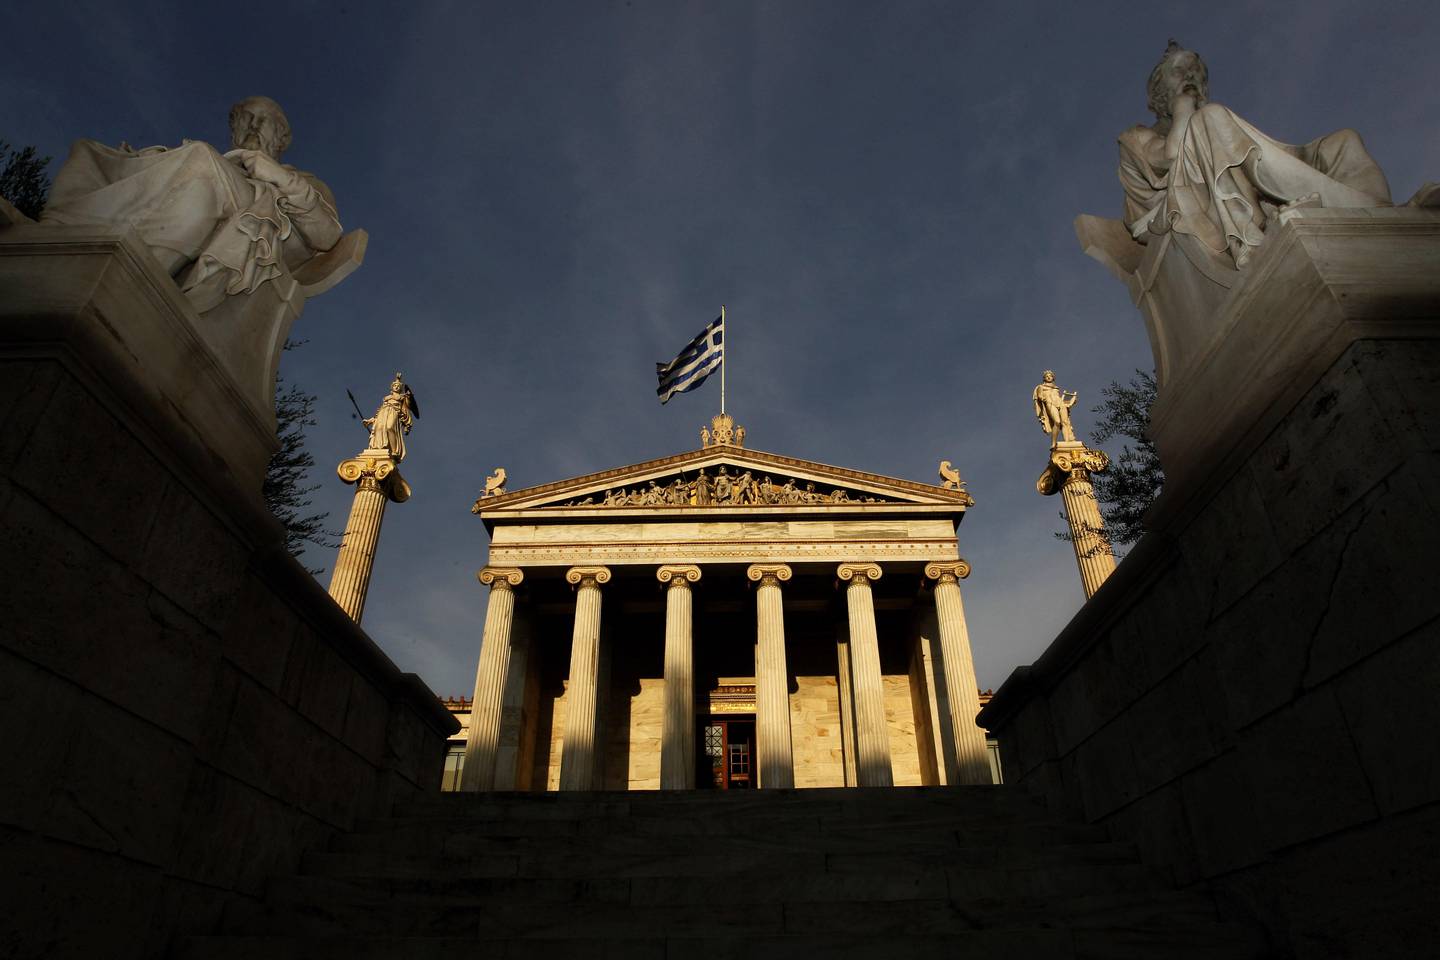 In this photo taken Friday, Oct. 21, 2011, marble statues of ancient Greek philosophers Socrates, right, and Plato, left, are seen on plinths in front of the Athens Academy, as the Greek flag flies. More than 200 international philosophers braved strikes and protests to come to Greece this month to join a forum and debate matters of the mind. Greece's illustrious ancient thinkers built the foundations of Western scholarship, and their philosophy stands as an unquantifiable source of national wealth even during a financial crisis. (AP Photo/Petros Giannakouris)